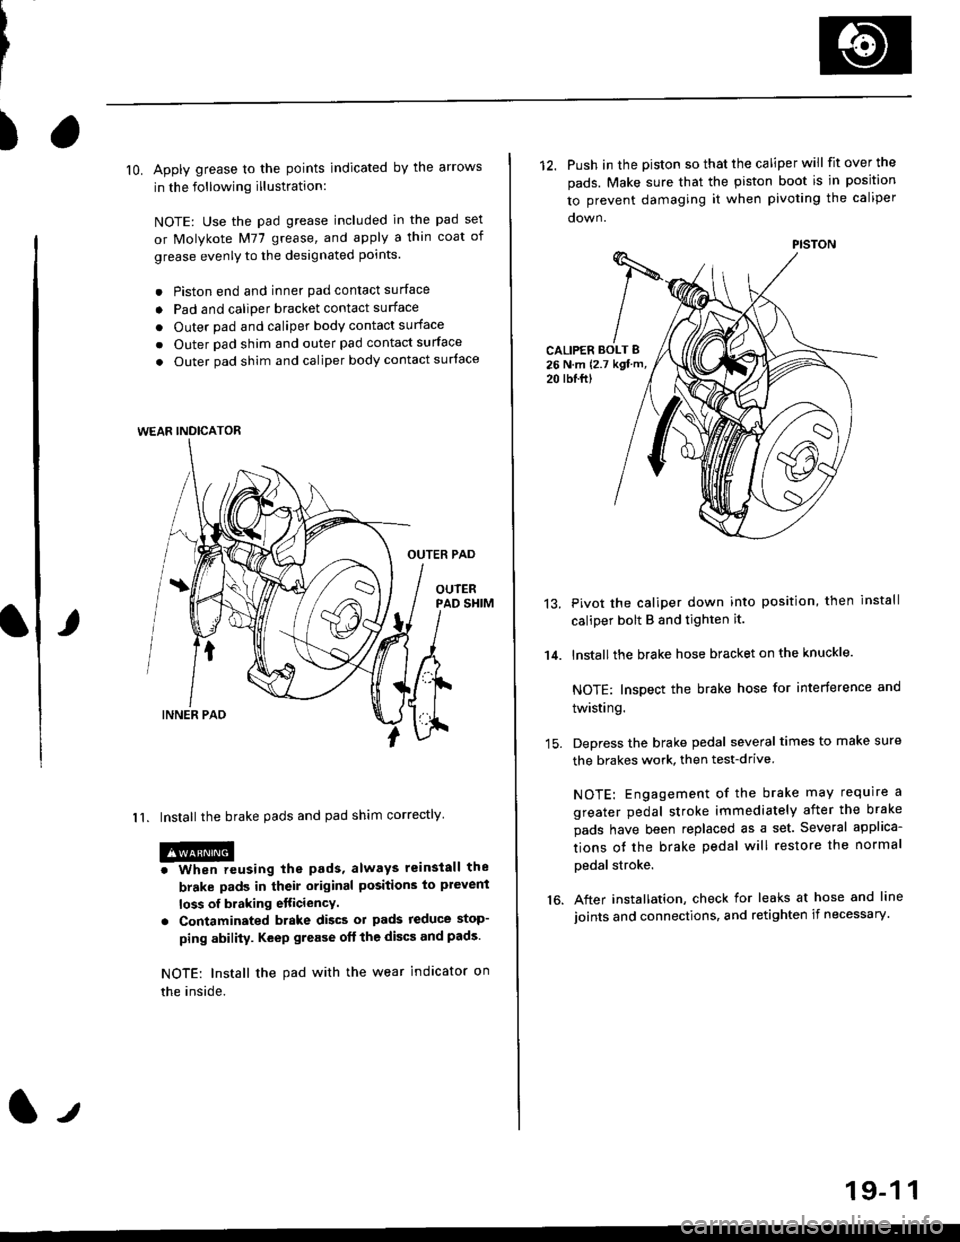 HONDA CIVIC 1997 6.G Workshop Manual )
lO. Apply grease to the points indicated by the arrows
in the following illustration:
NOTE: Use the pad grease included in the pad set
or Molykote M77 grease, and apply a thin coat of
grease evenly 